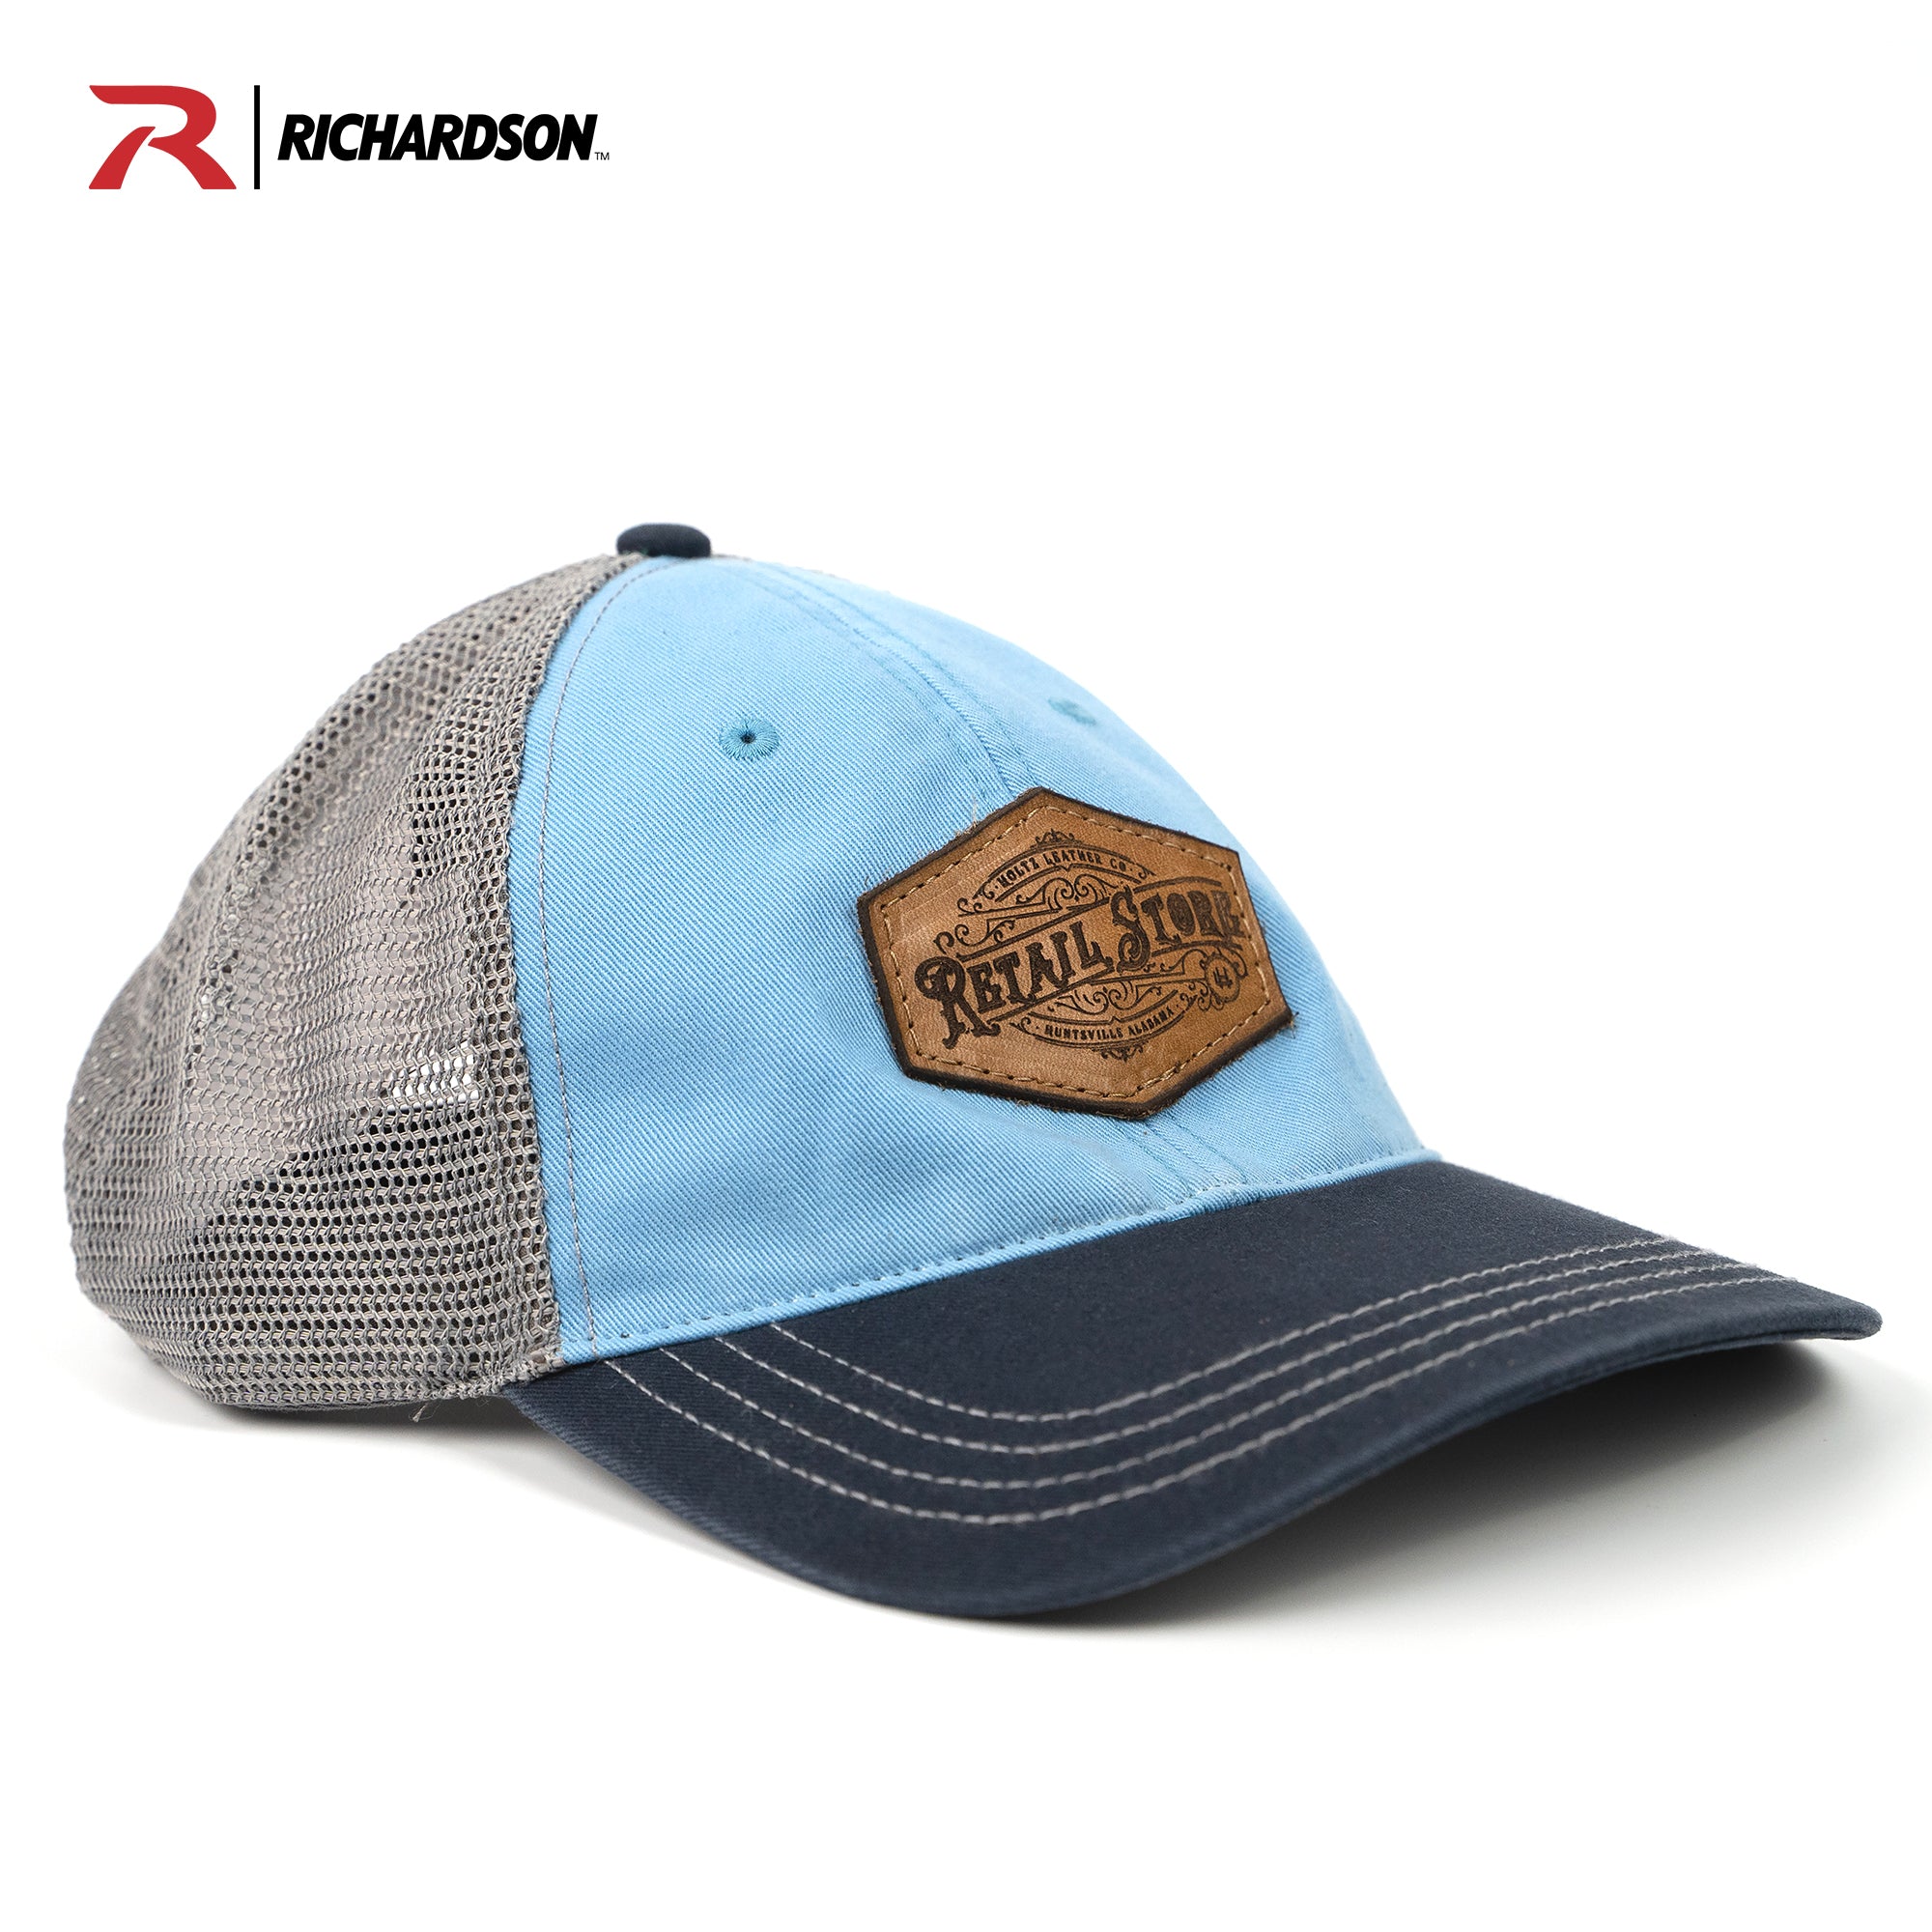 Blue and navy relaxed trucker hat with customized leather patch